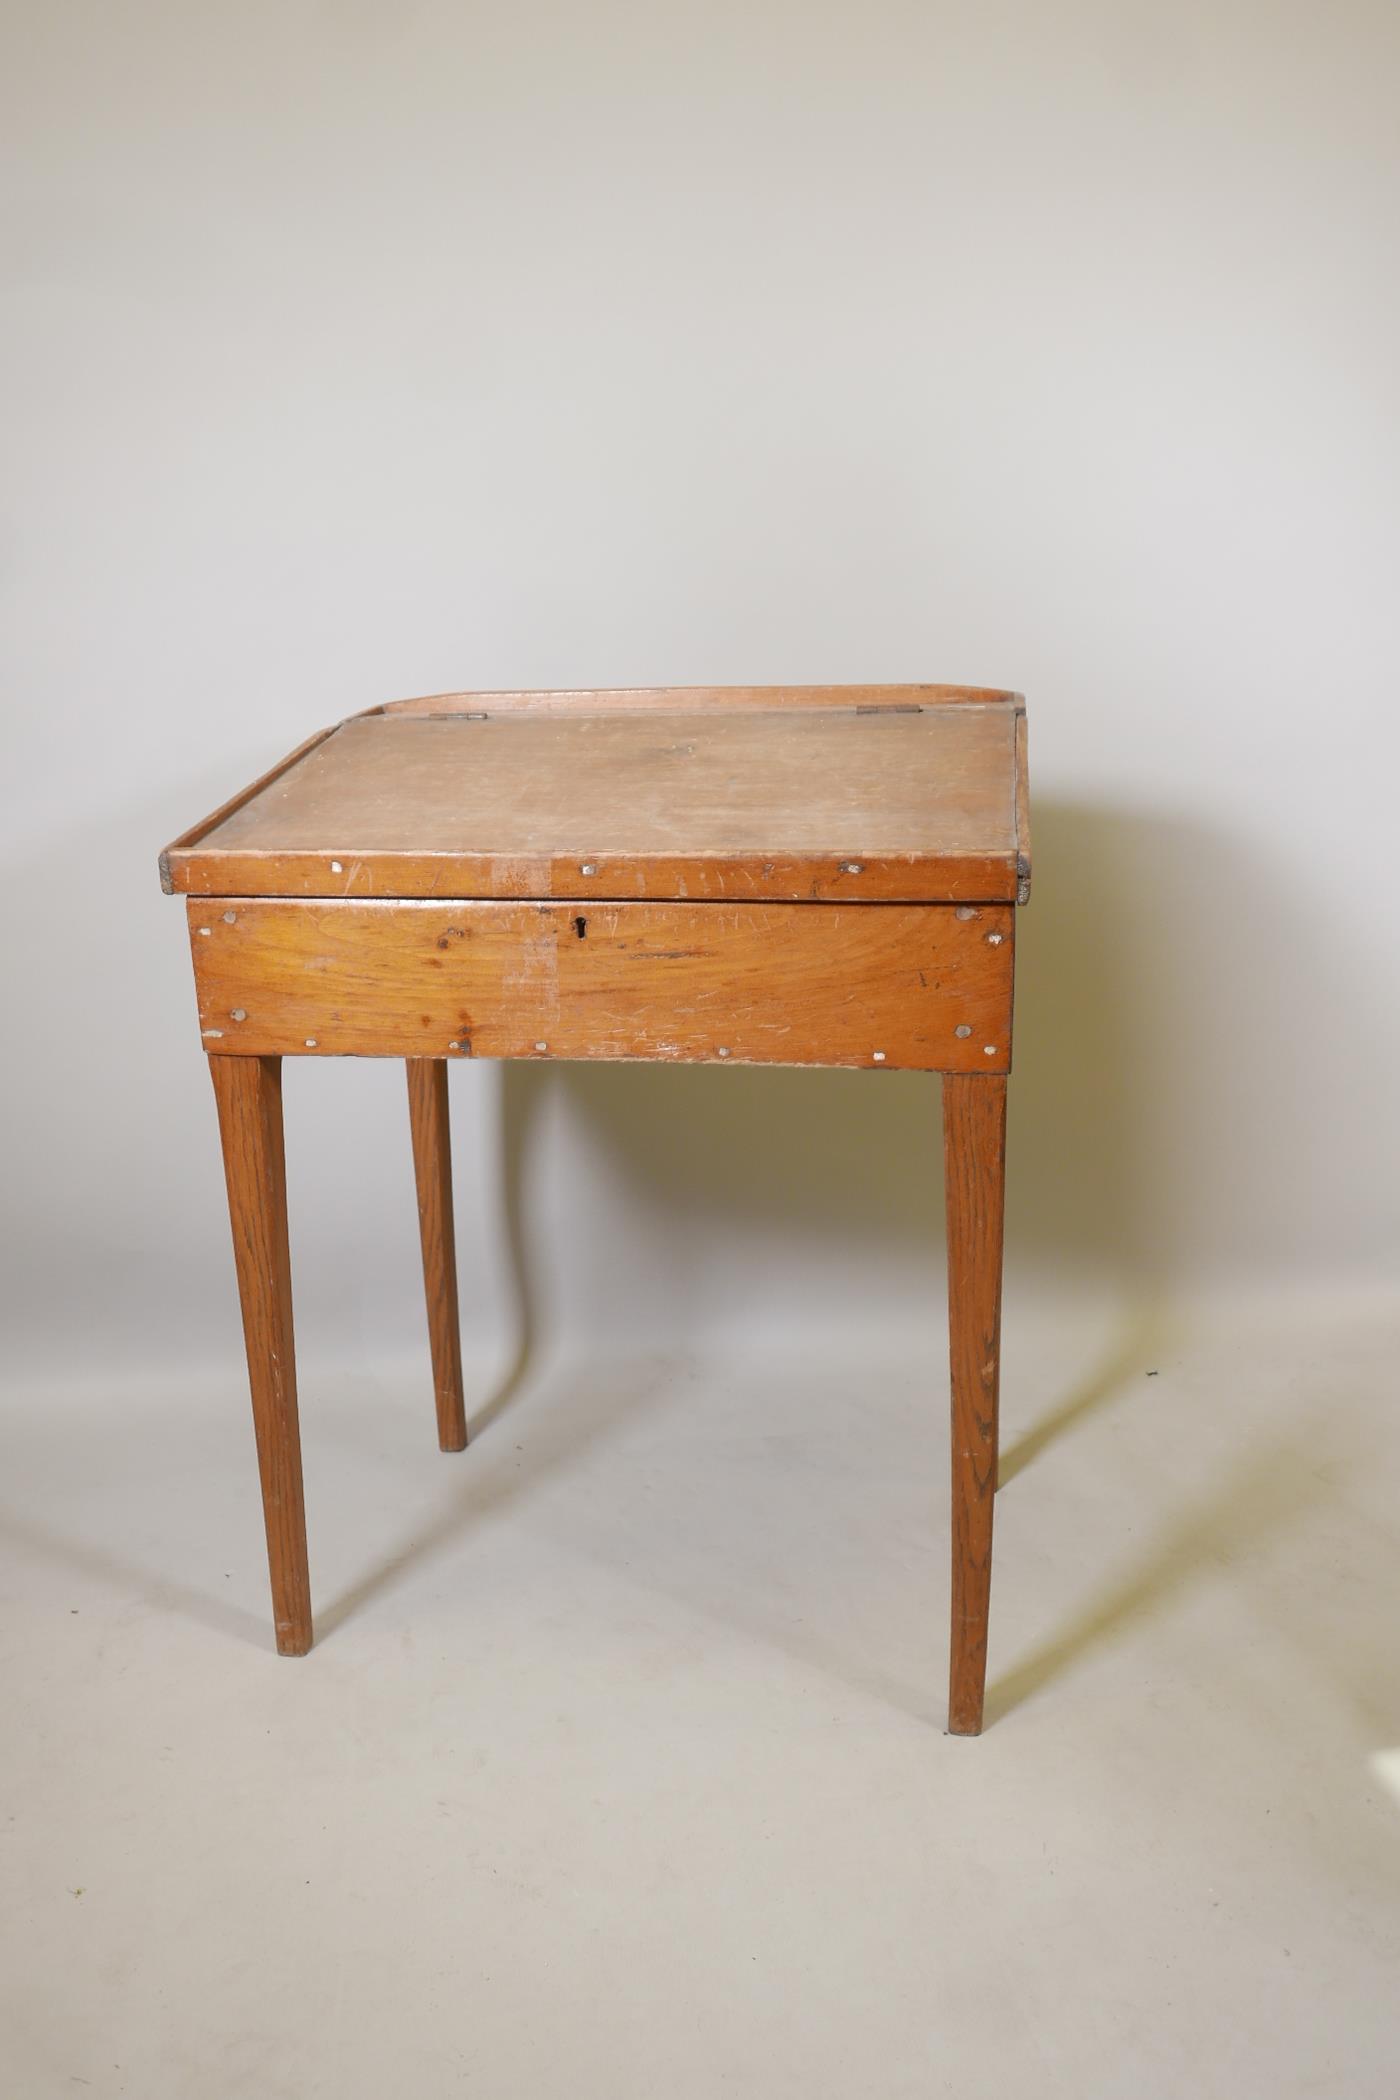 A C19th pine clerk's desk, raised on square tapering supports, 29" x 22" x 37" - Image 2 of 2